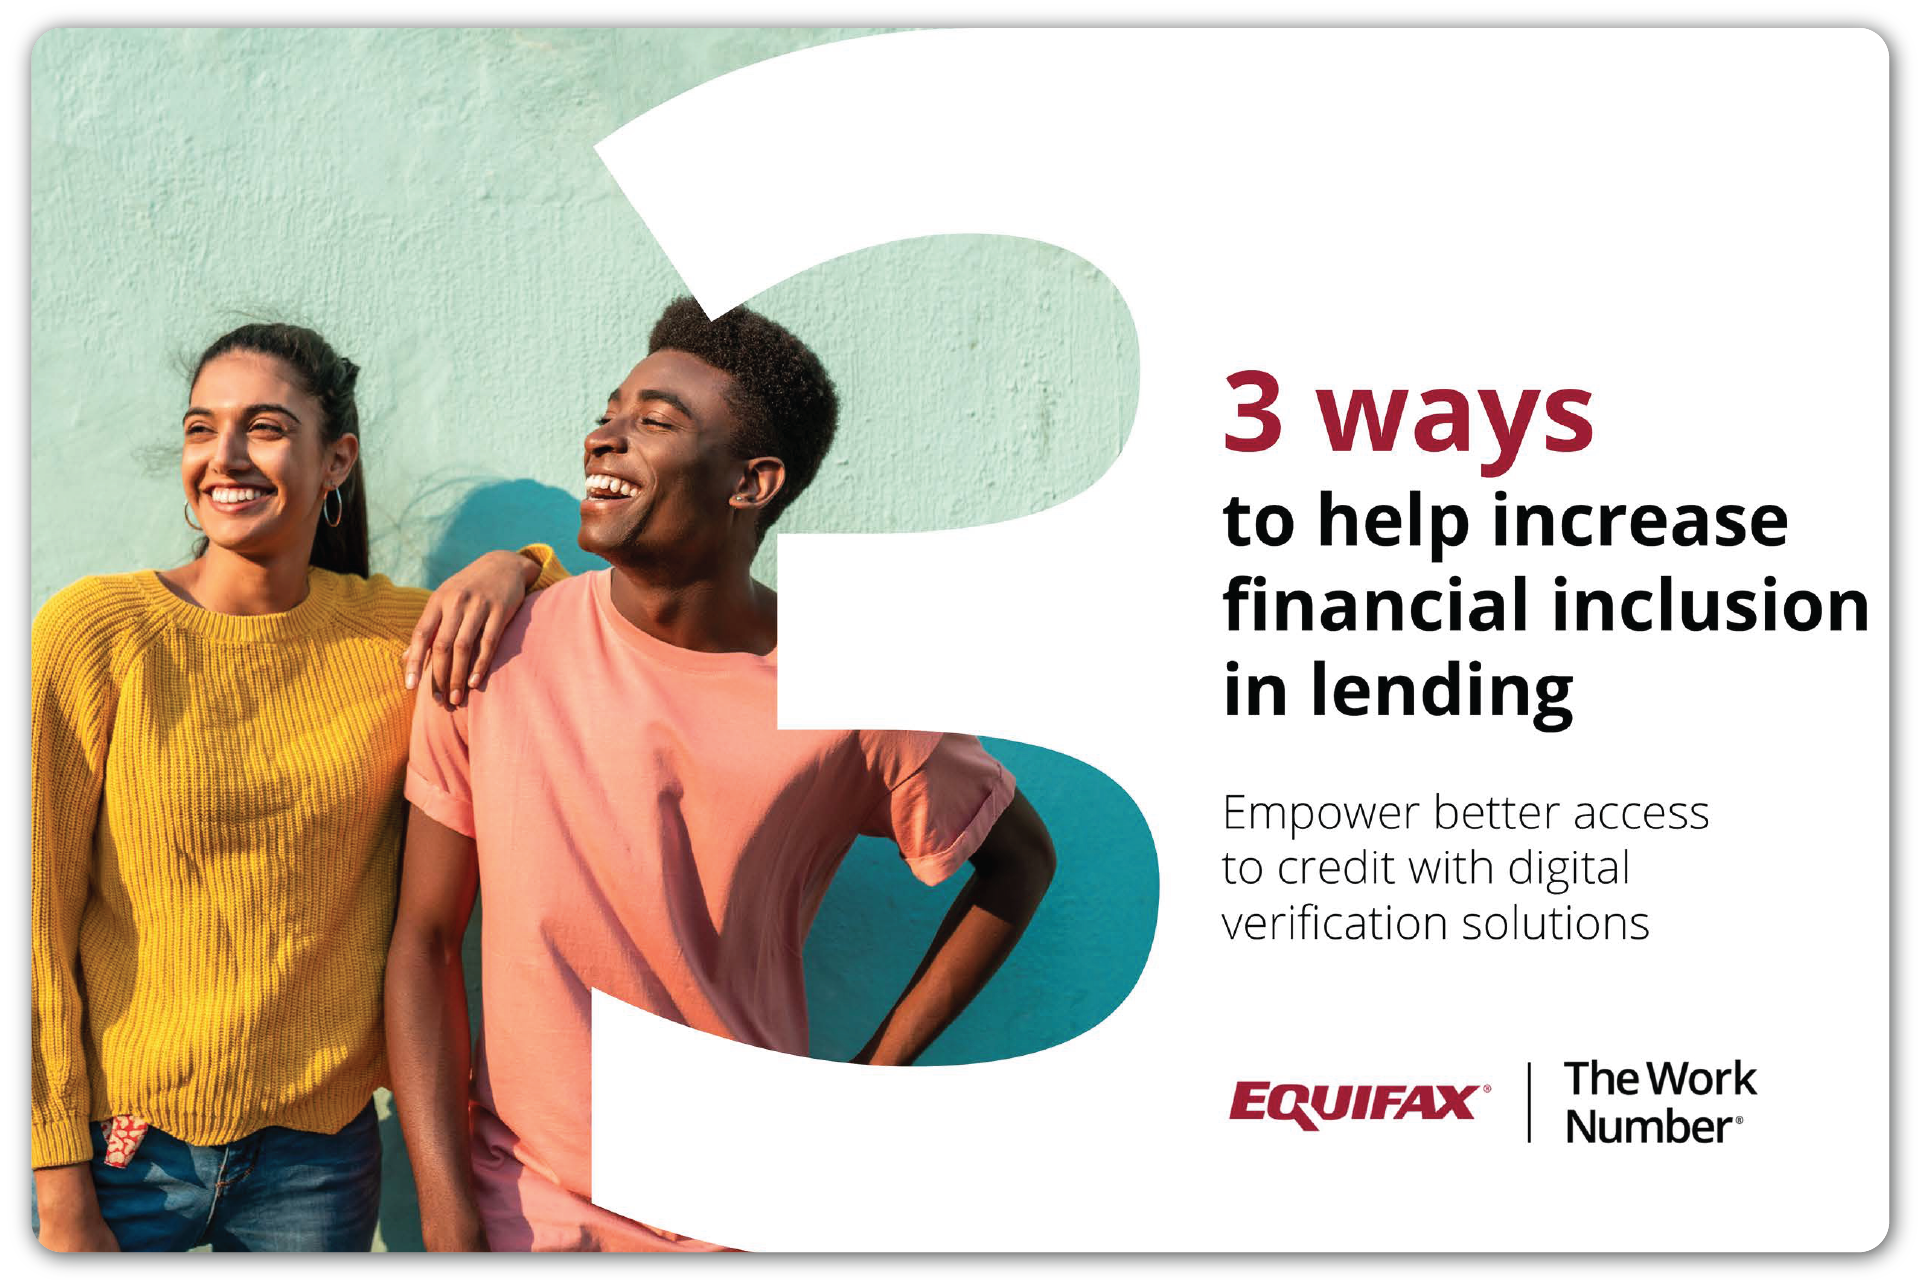 Ebook: 3 Ways To Help Increase Financial Inclusion in Lending Image